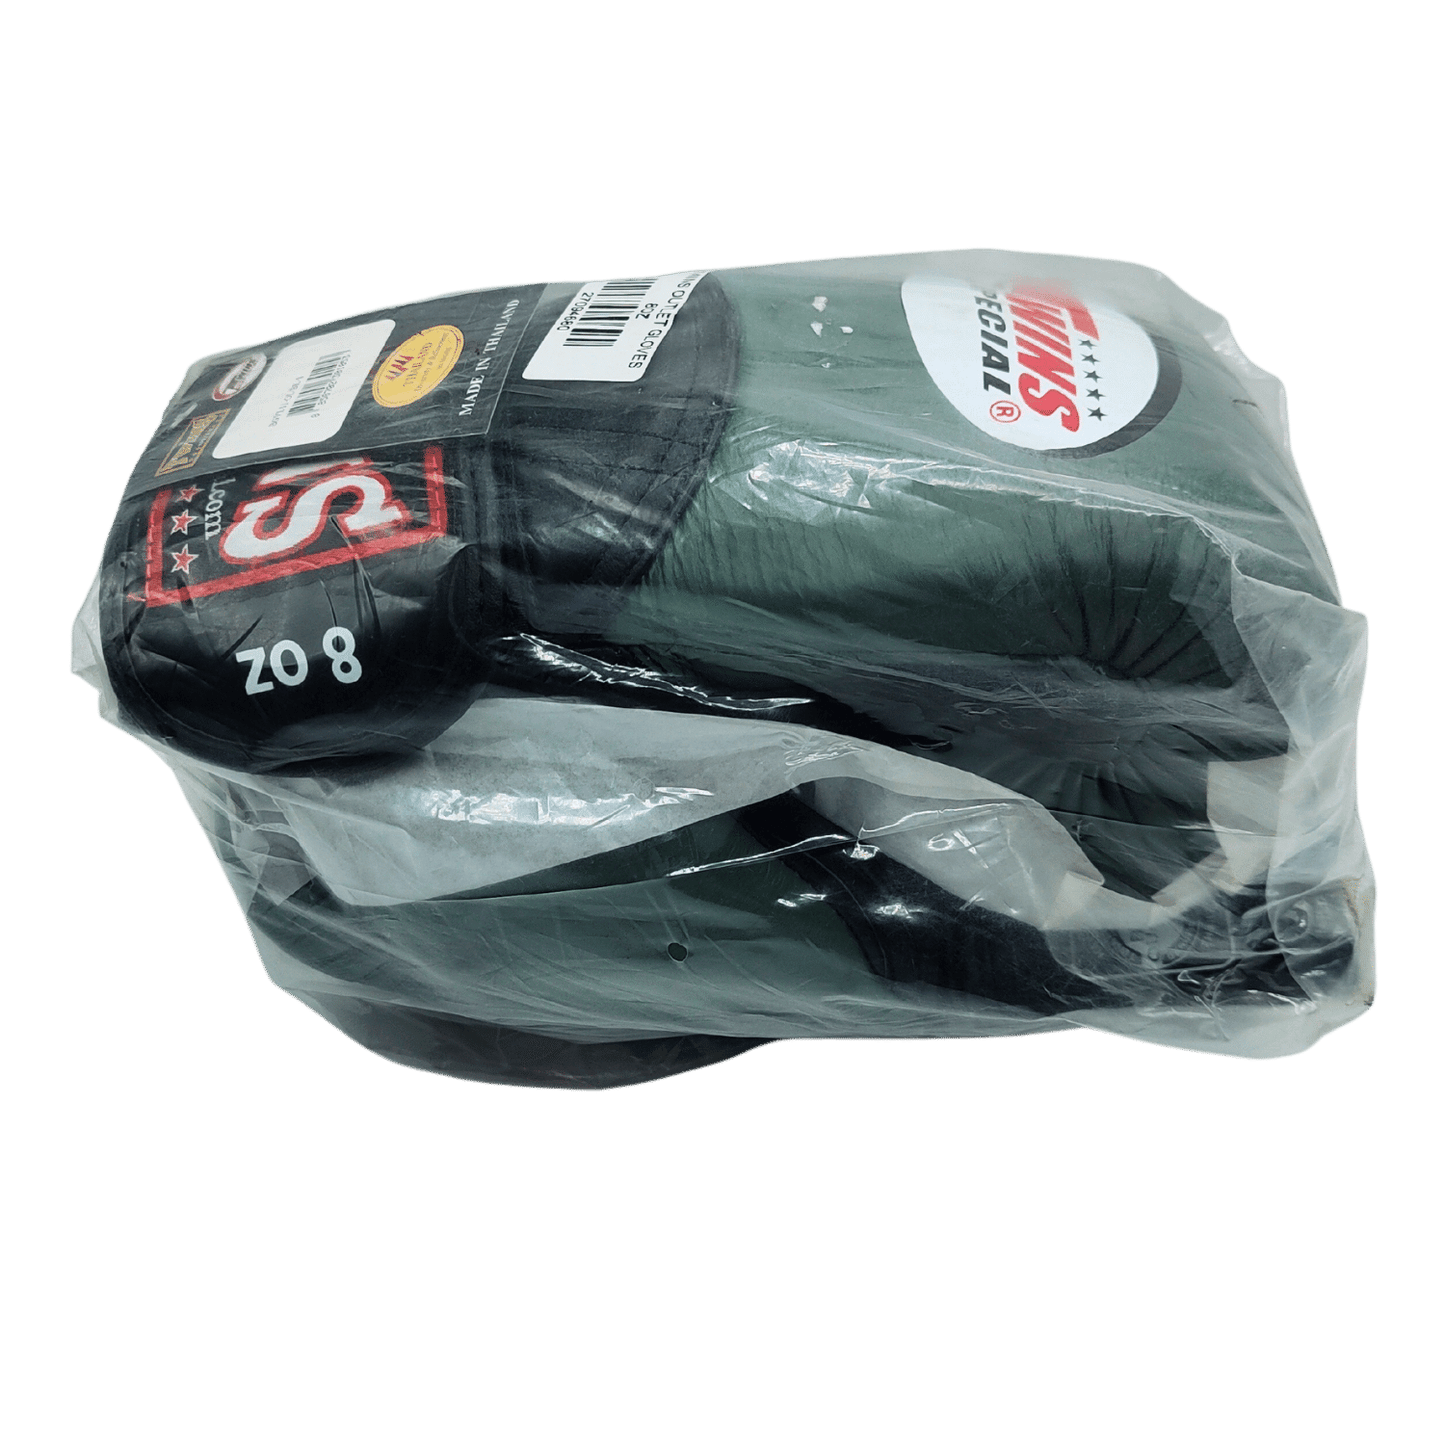 A plastic bag containing a pair of Twins Duo Colour 8oz Boxing Gloves - Black & Olive.